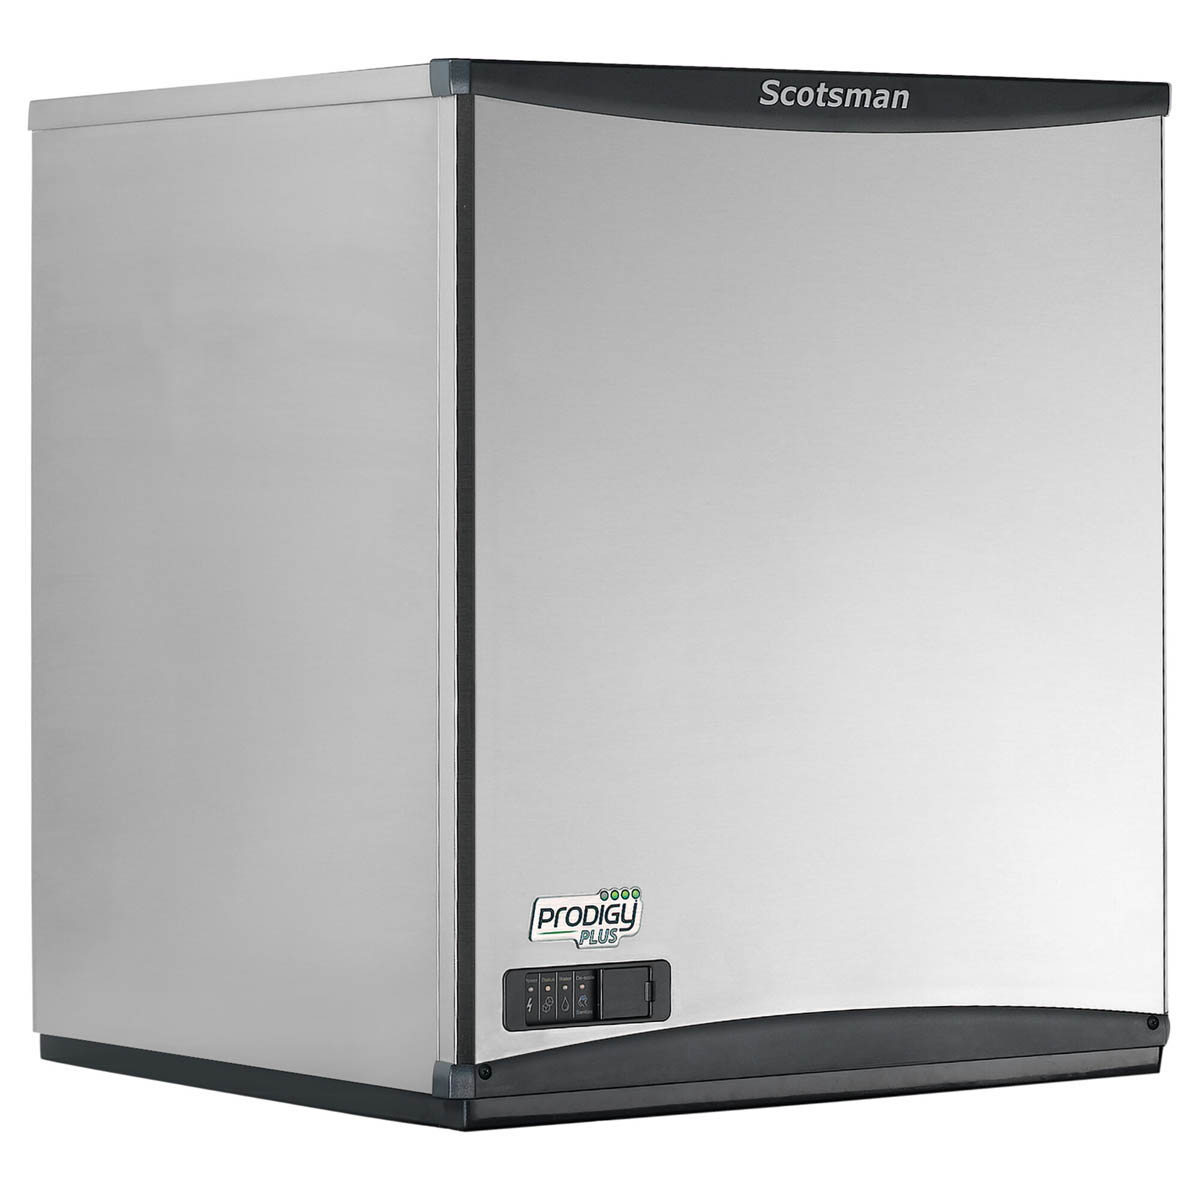 Scotsman NS0922R-32 Prodigy Plus Nugget Chewable Ice Machine, Chef's Deal